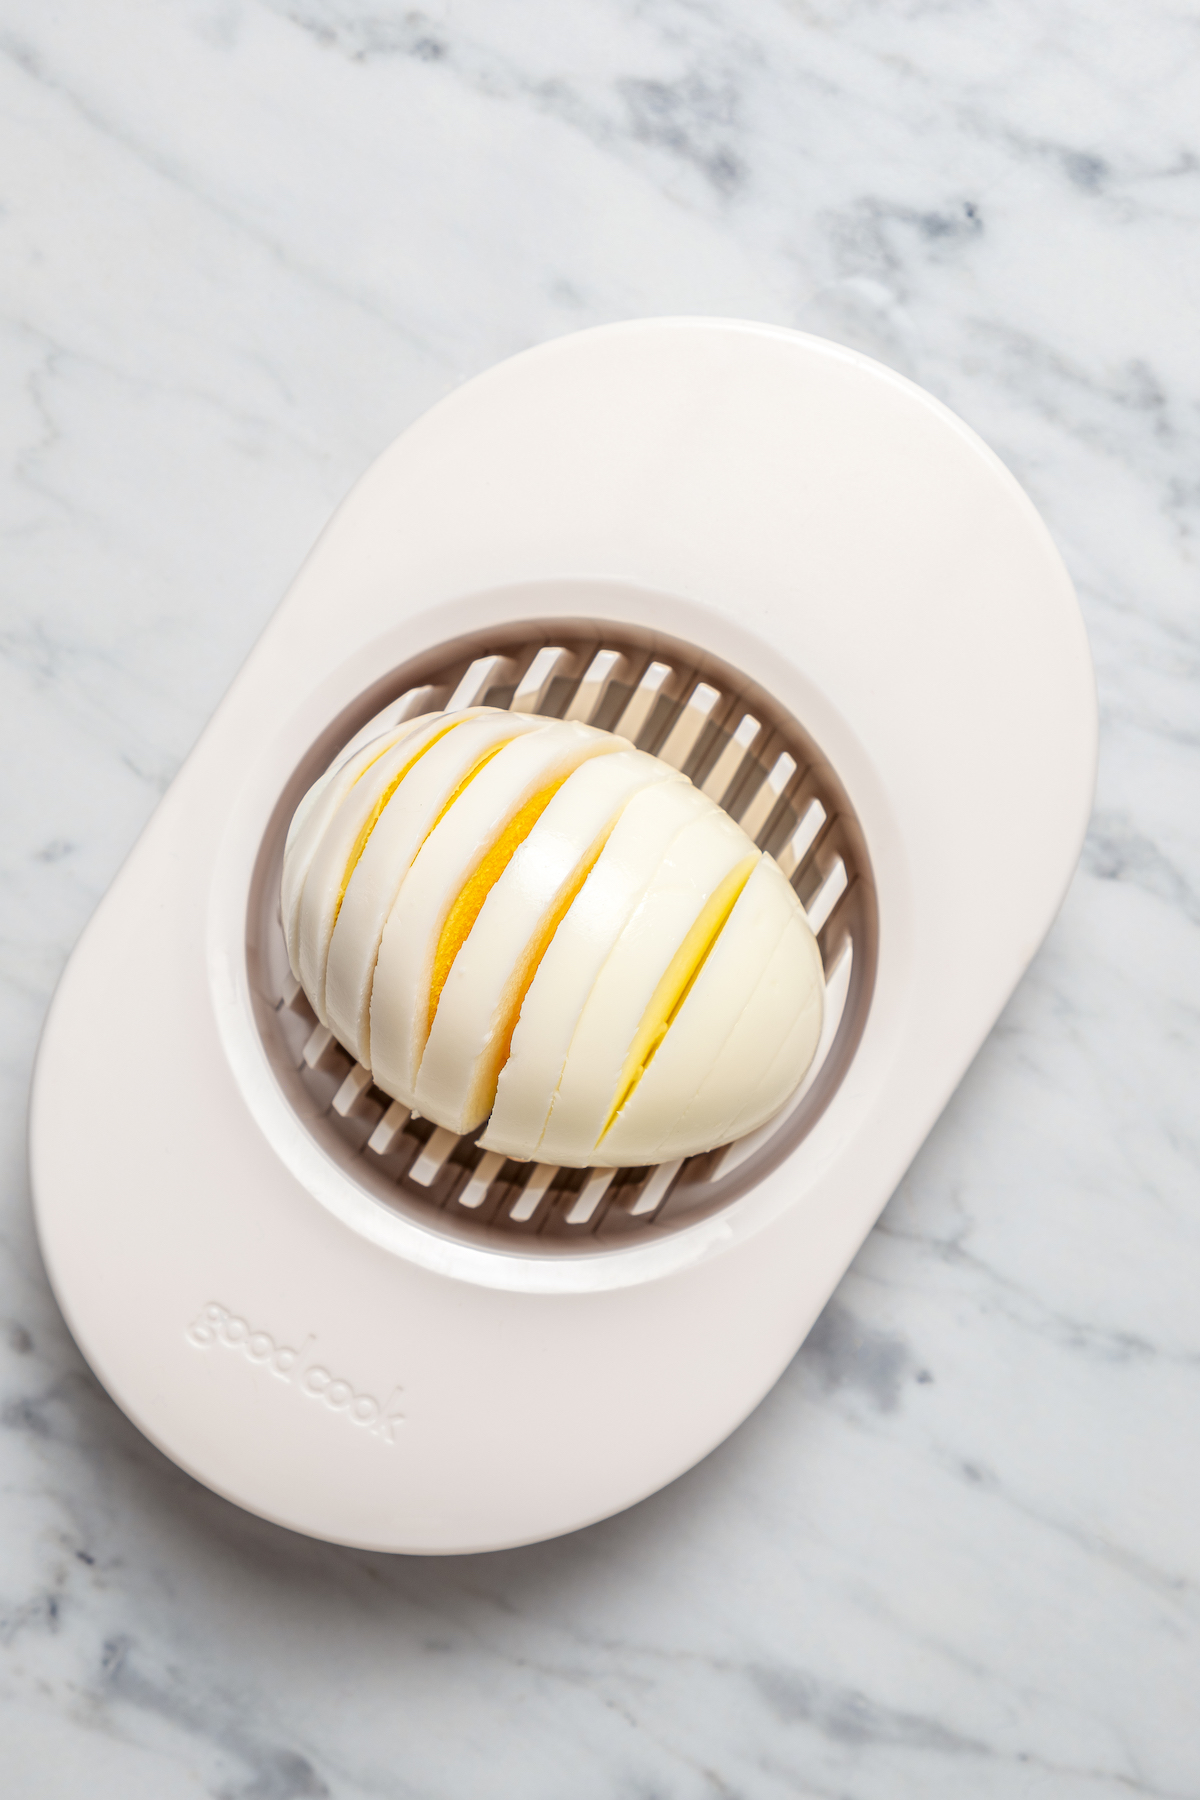 Cutting a boiled egg with an egg slicer.